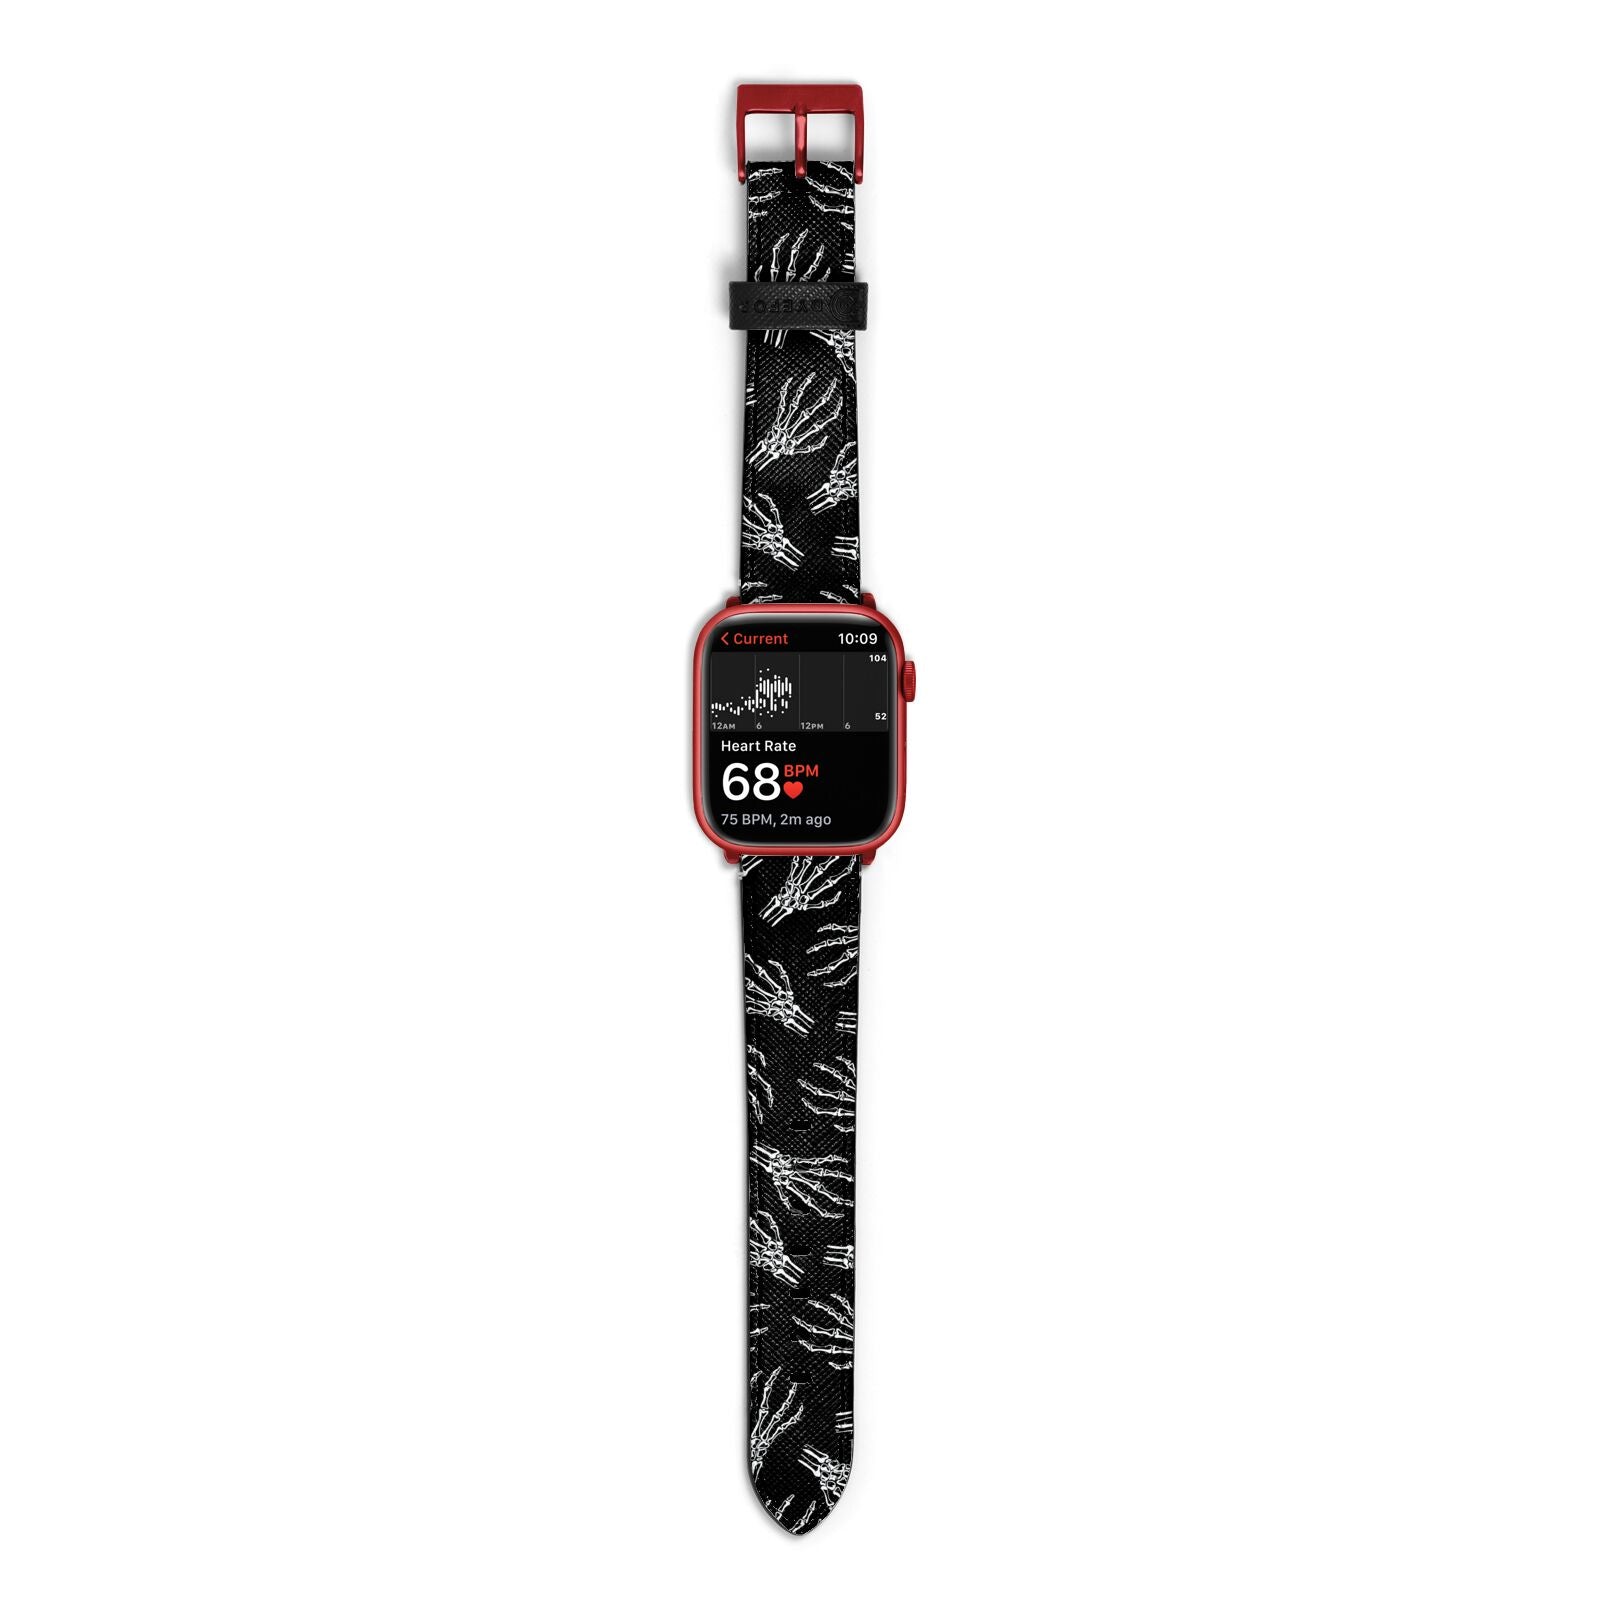 Skeleton Hands Apple Watch Strap Size 38mm with Red Hardware